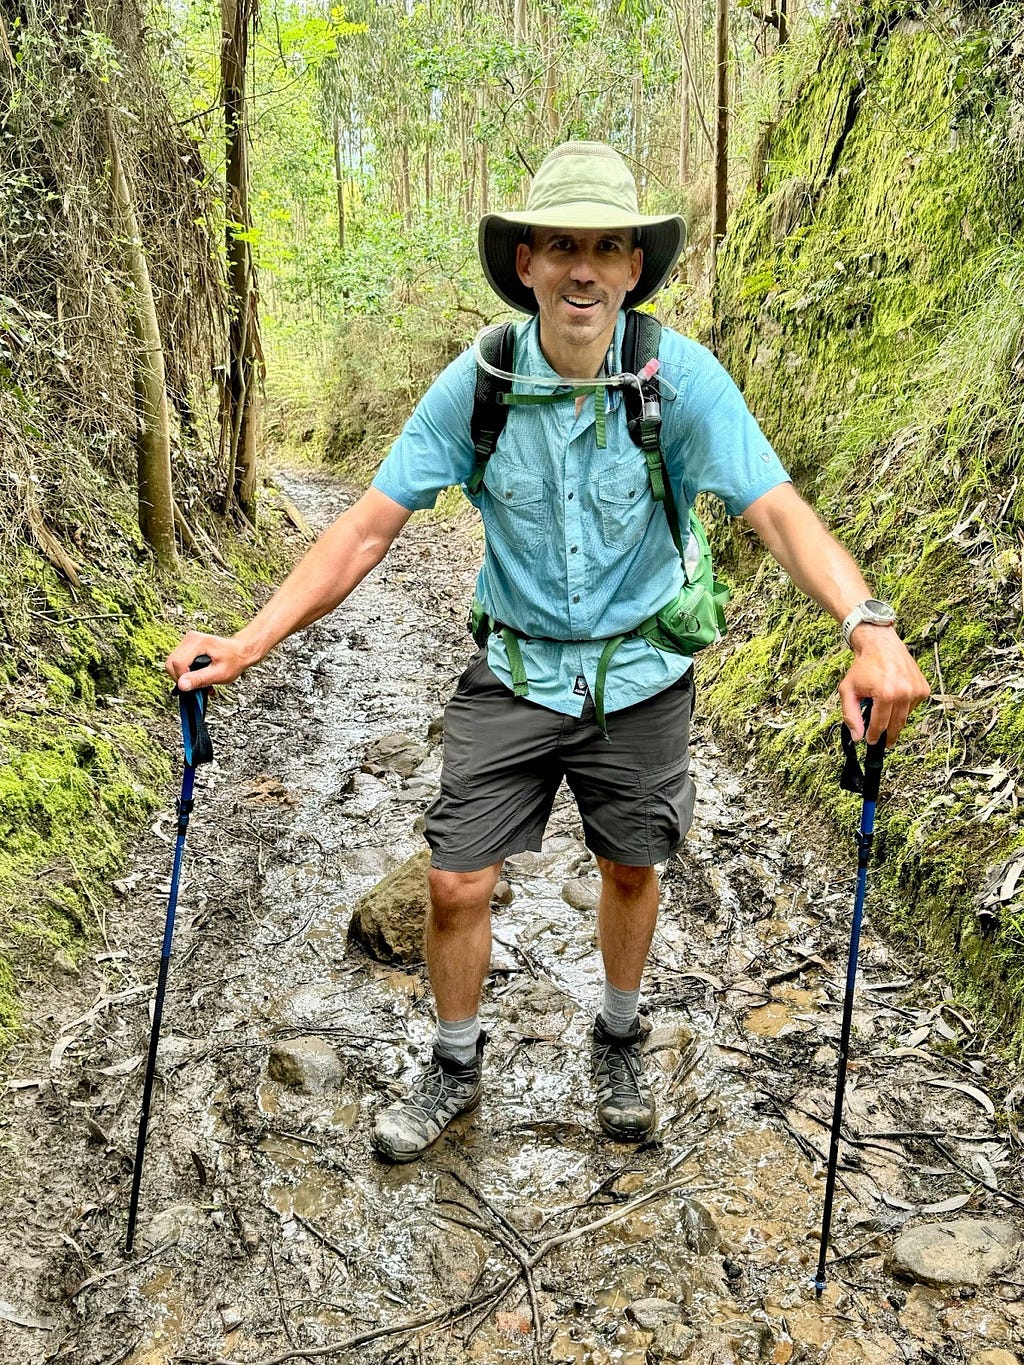 The author with two hiking sticks, pausing for a rest on steep muddy trail.